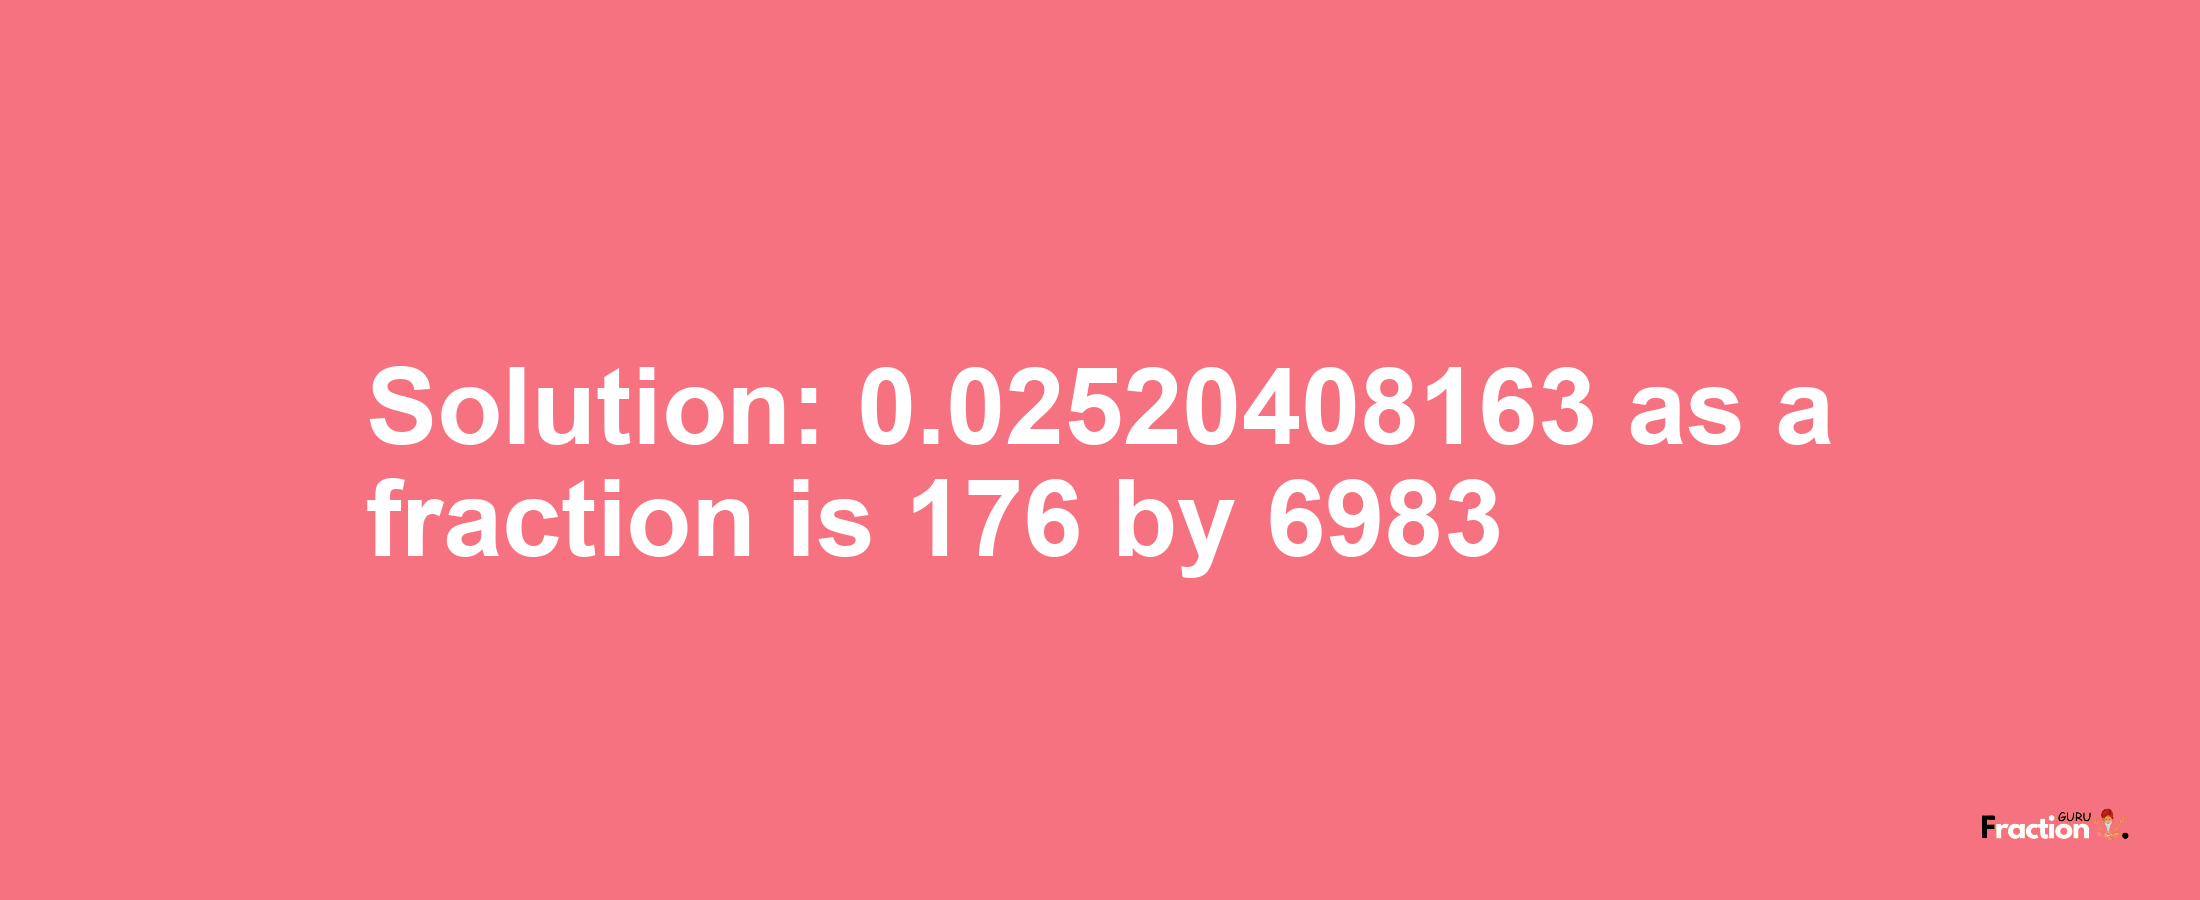 Solution:0.02520408163 as a fraction is 176/6983